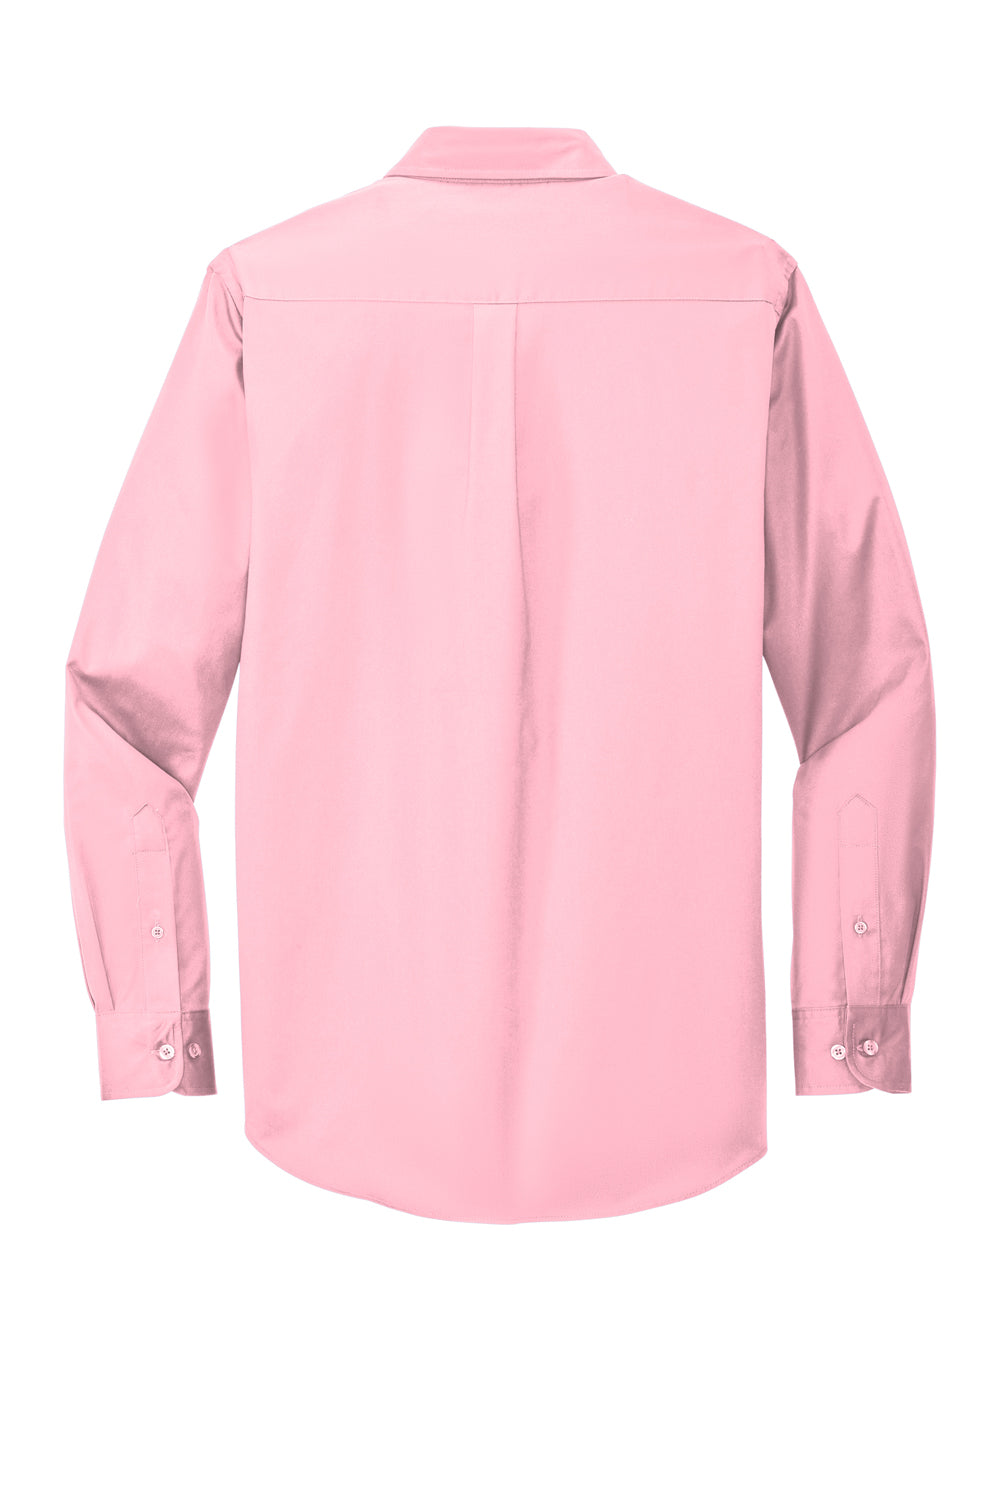 Port Authority S608/TLS608/S608ES Mens Easy Care Wrinkle Resistant Long Sleeve Button Down Shirt w/ Pocket Light Pink Flat Back